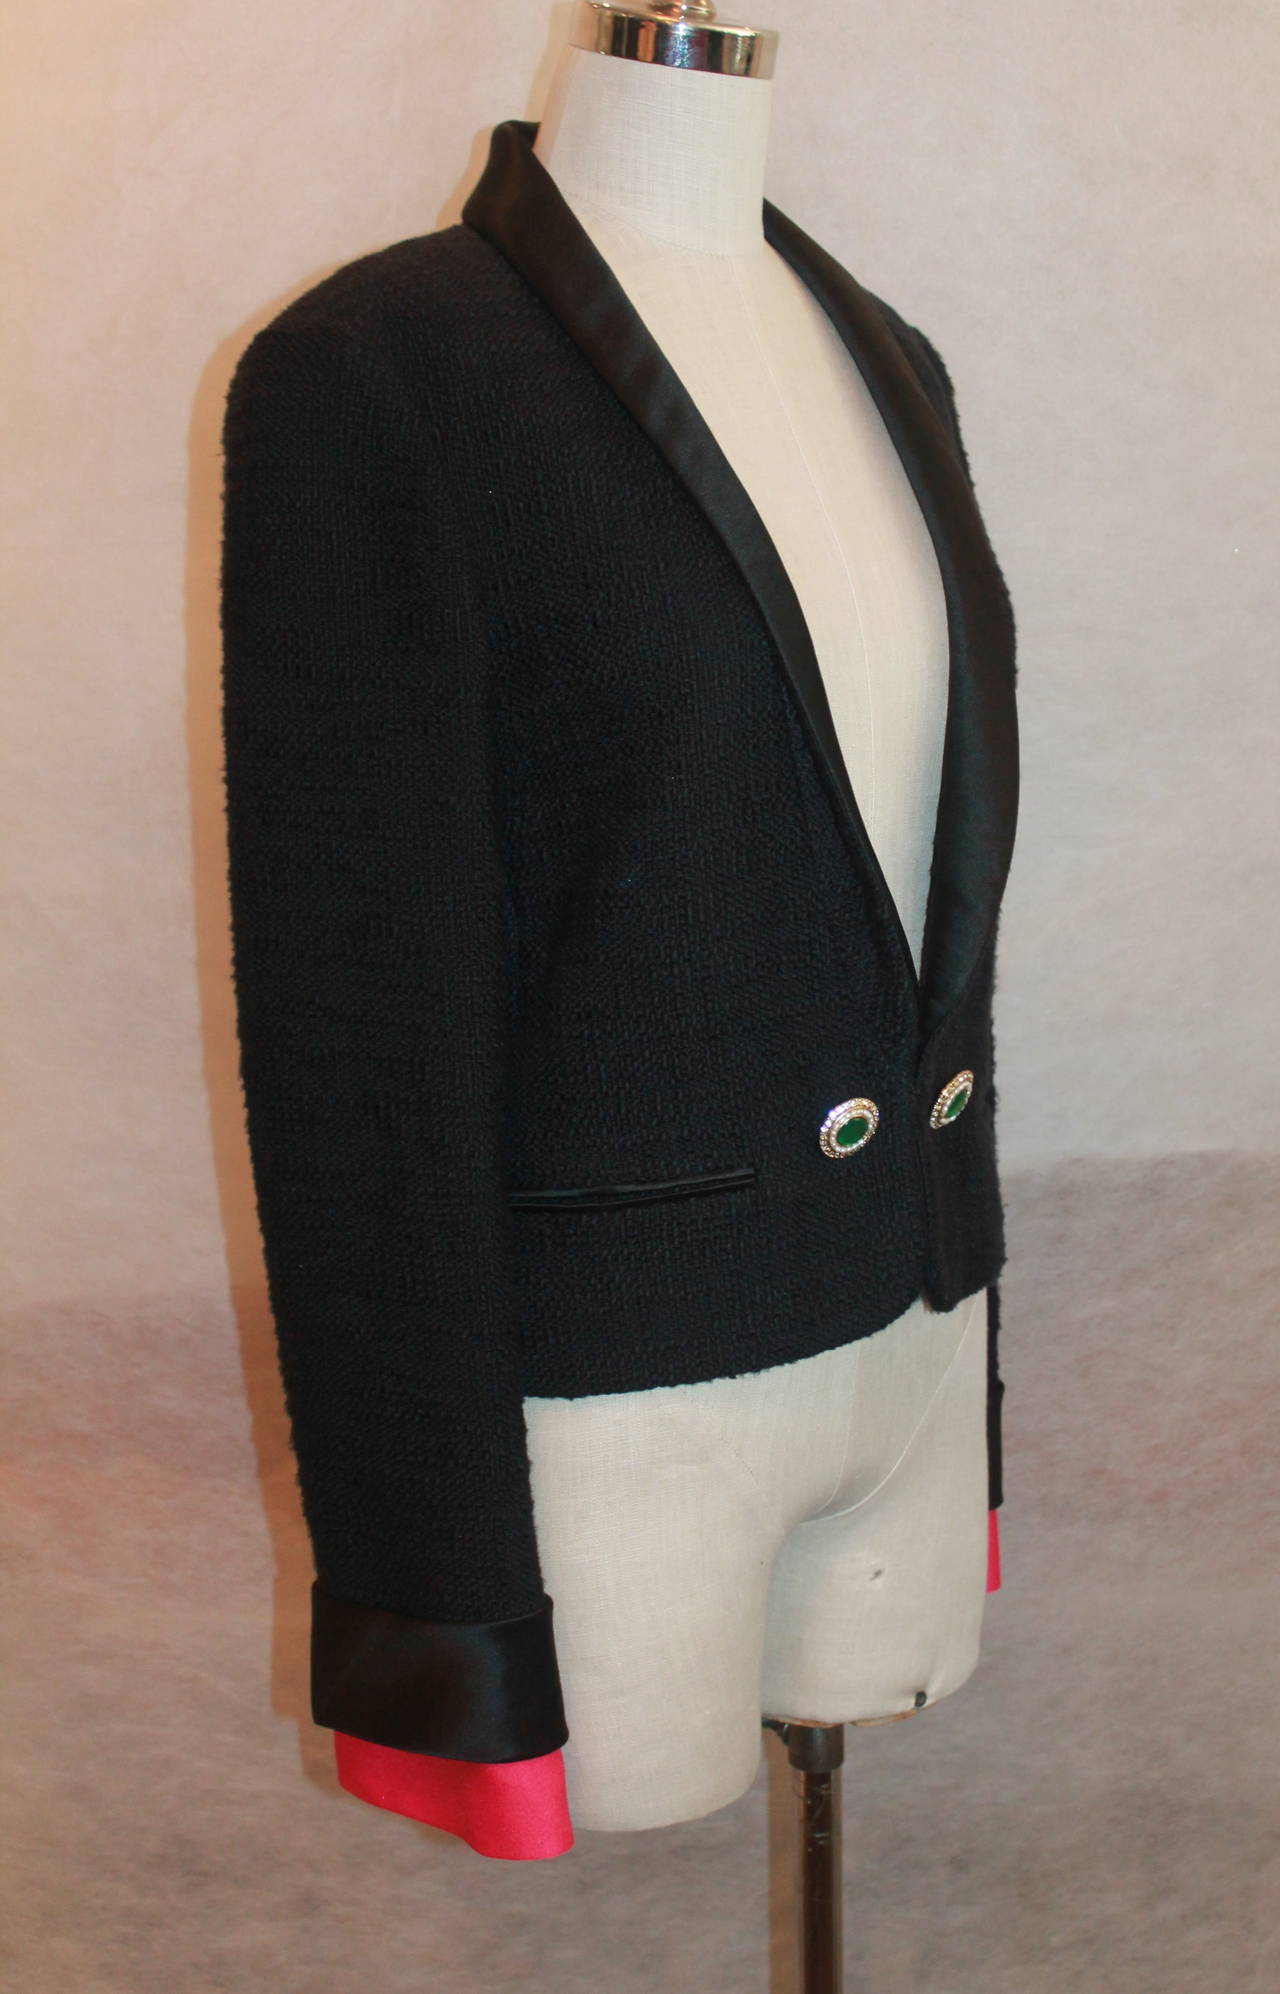 Chanel Black tuxedo style jacket w/ pink removable cuffs-40 
2 beautiful front gripoix buttons w/ pearls and rhinestones, 2 pockets
Measurements:
Bust 36"
Shoulder to shoulder 15.5"
Waist 33"
Sleeve length 24" (not